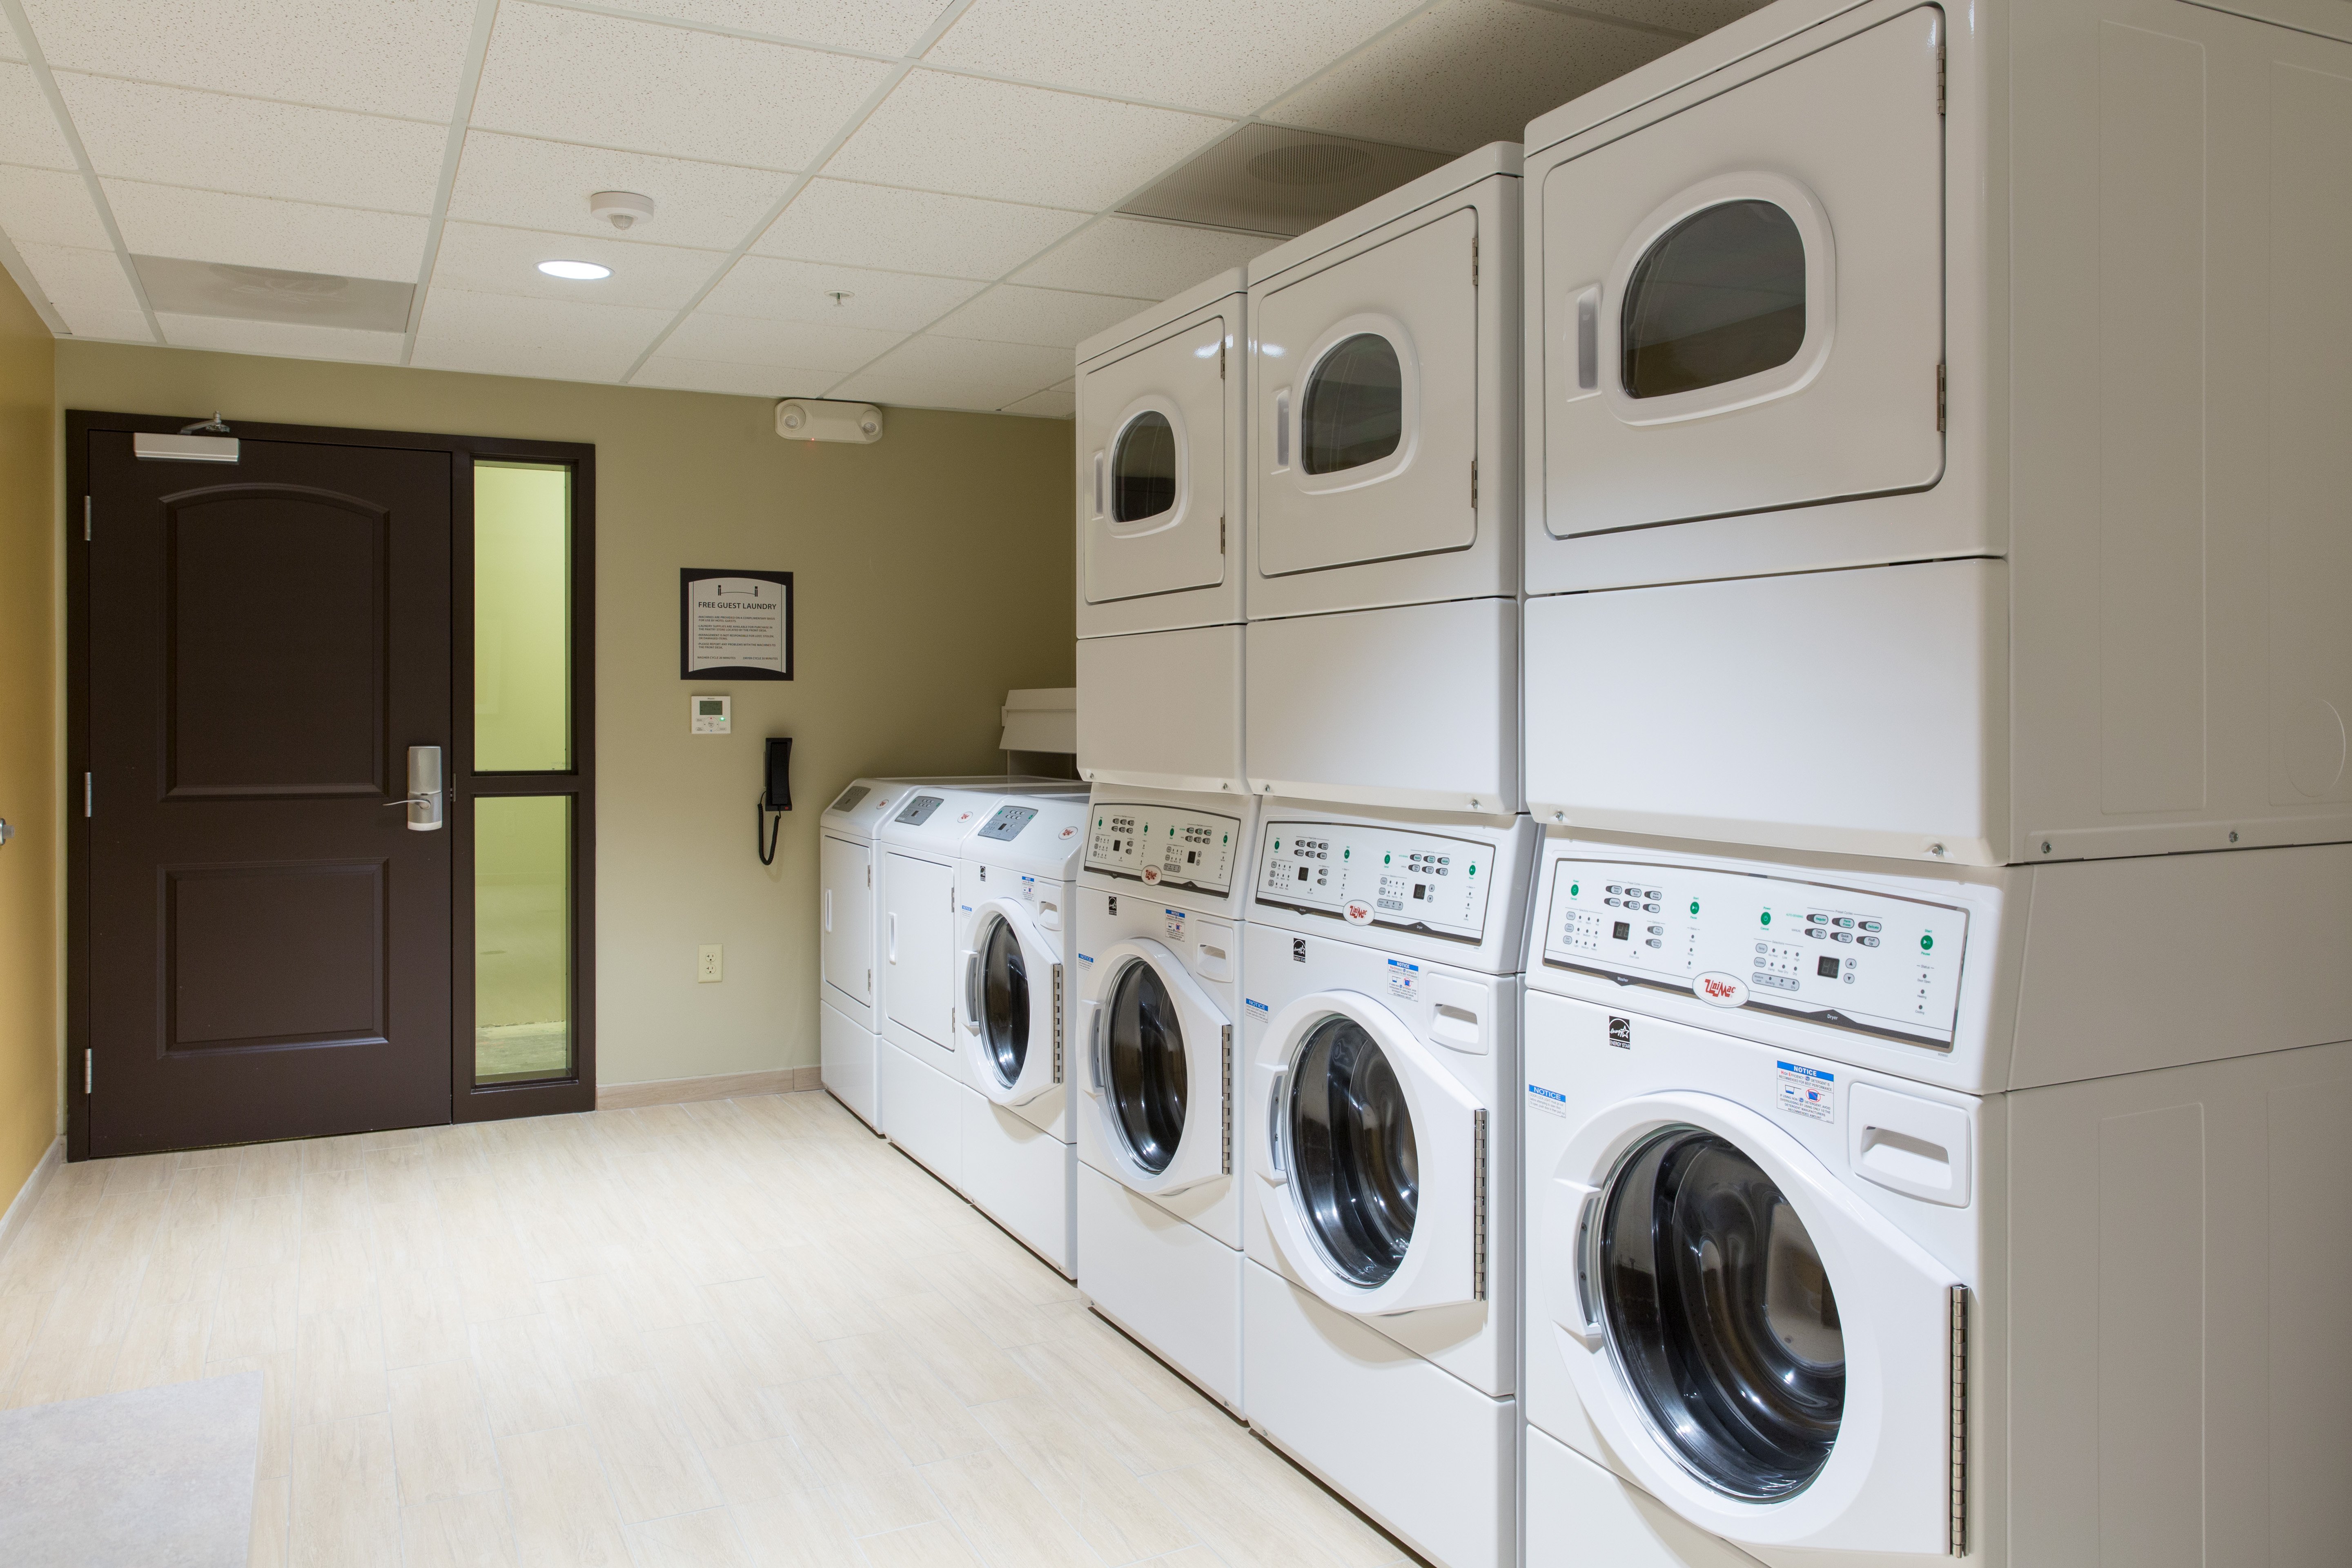 24 /7 Free guest laundry - no quarters needed at Staybridge Suites